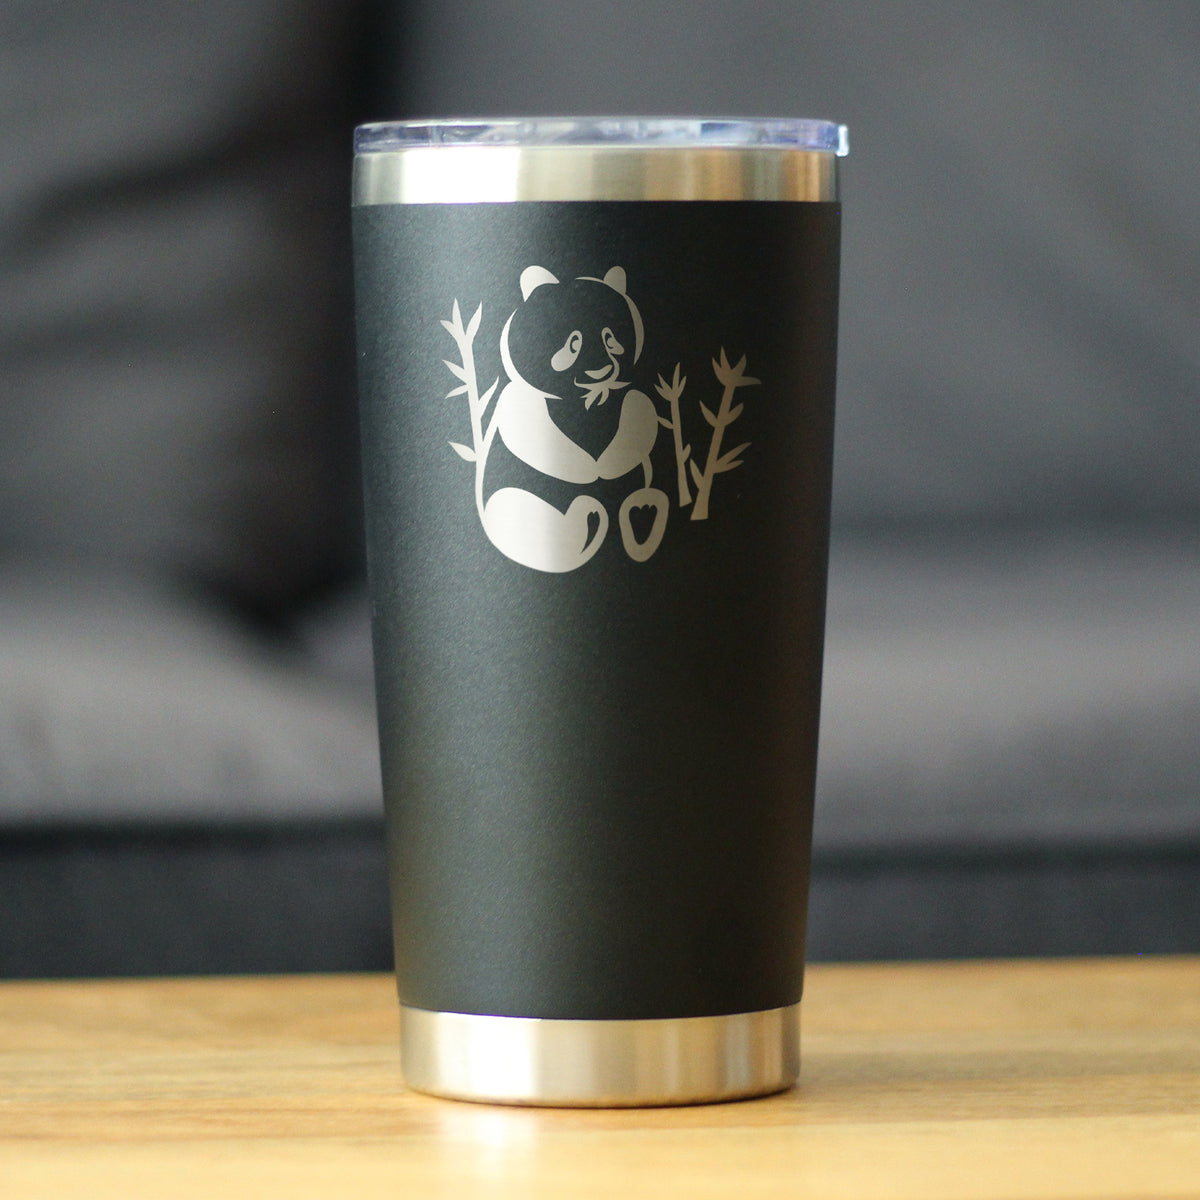 Panda - Insulated Coffee Tumbler Cup with Sliding Lid - Stainless Steel Travel Mug - Unique Panda Bear Gifts for Women and Men